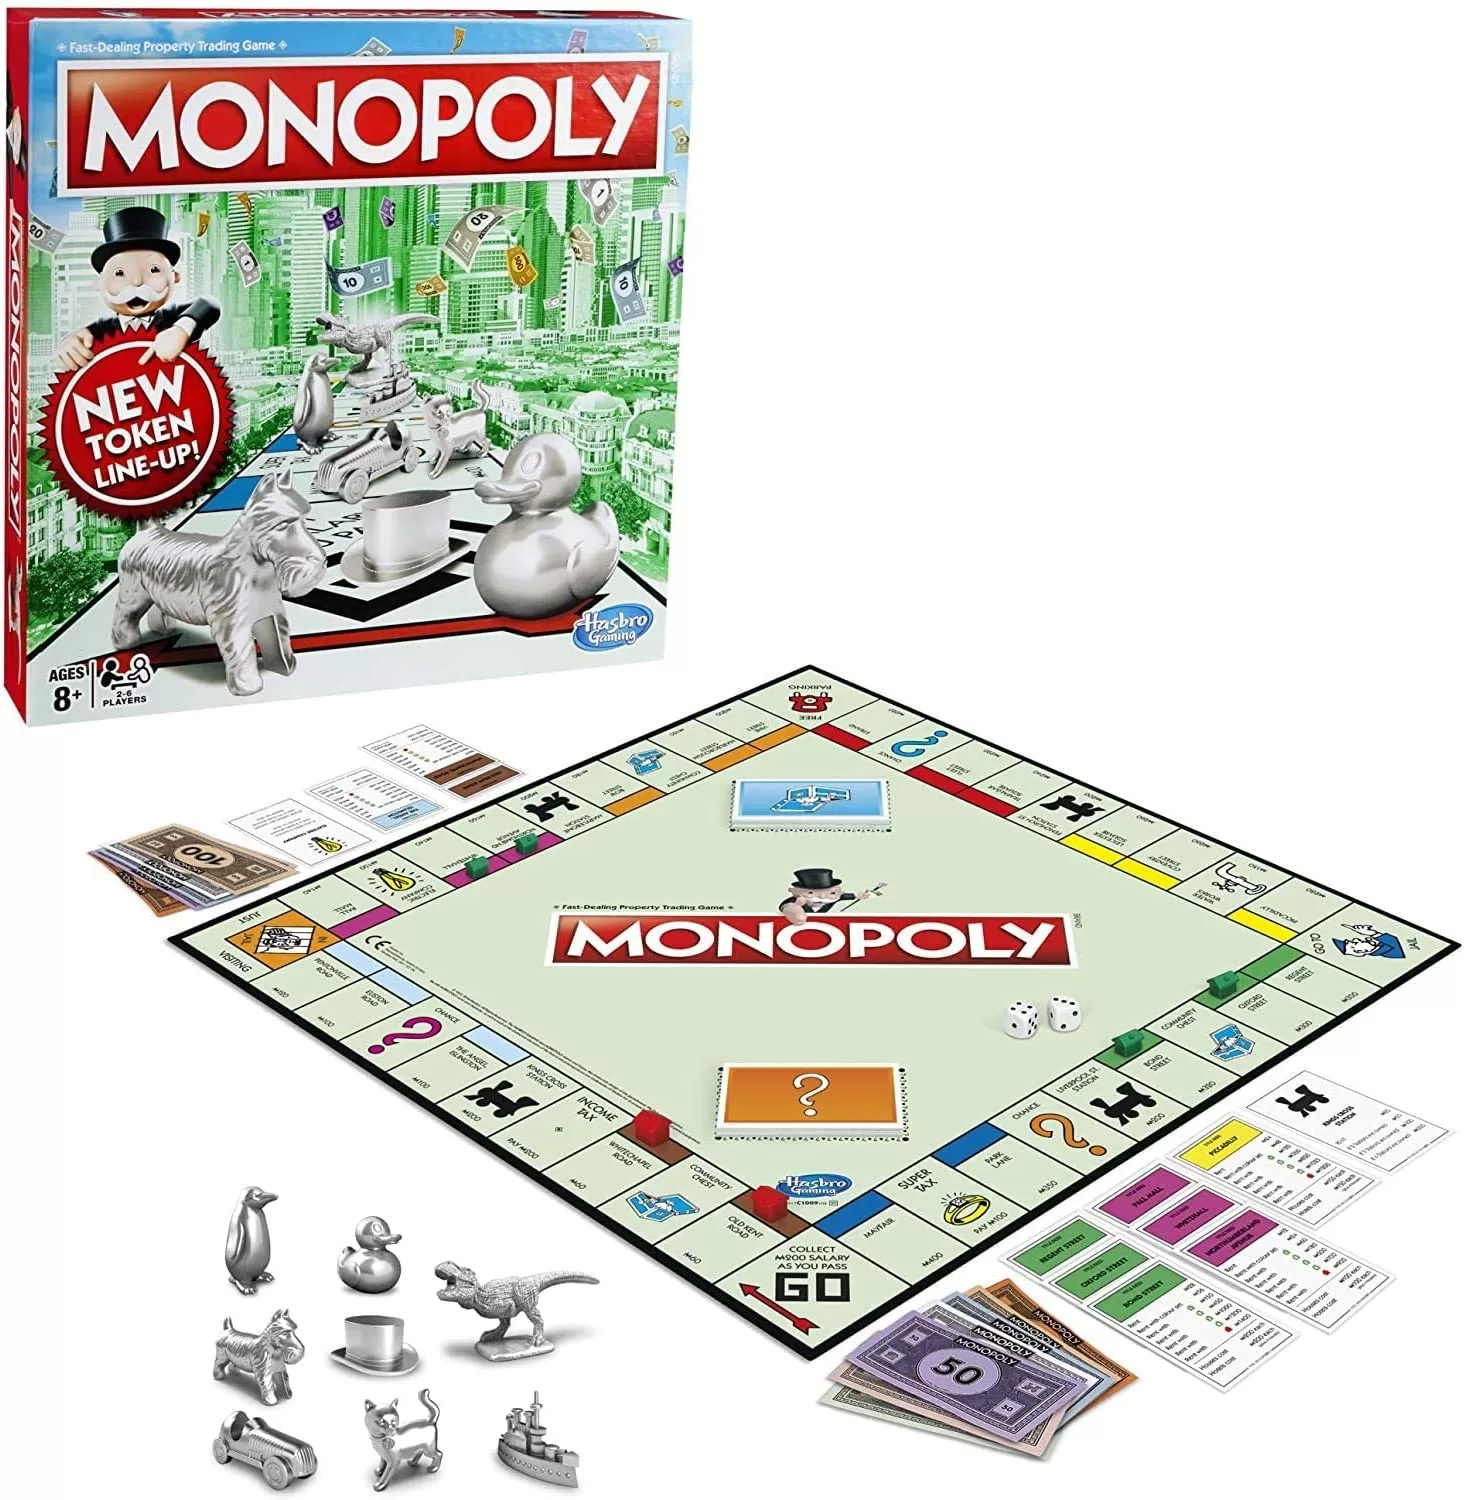 monopoly is not that good